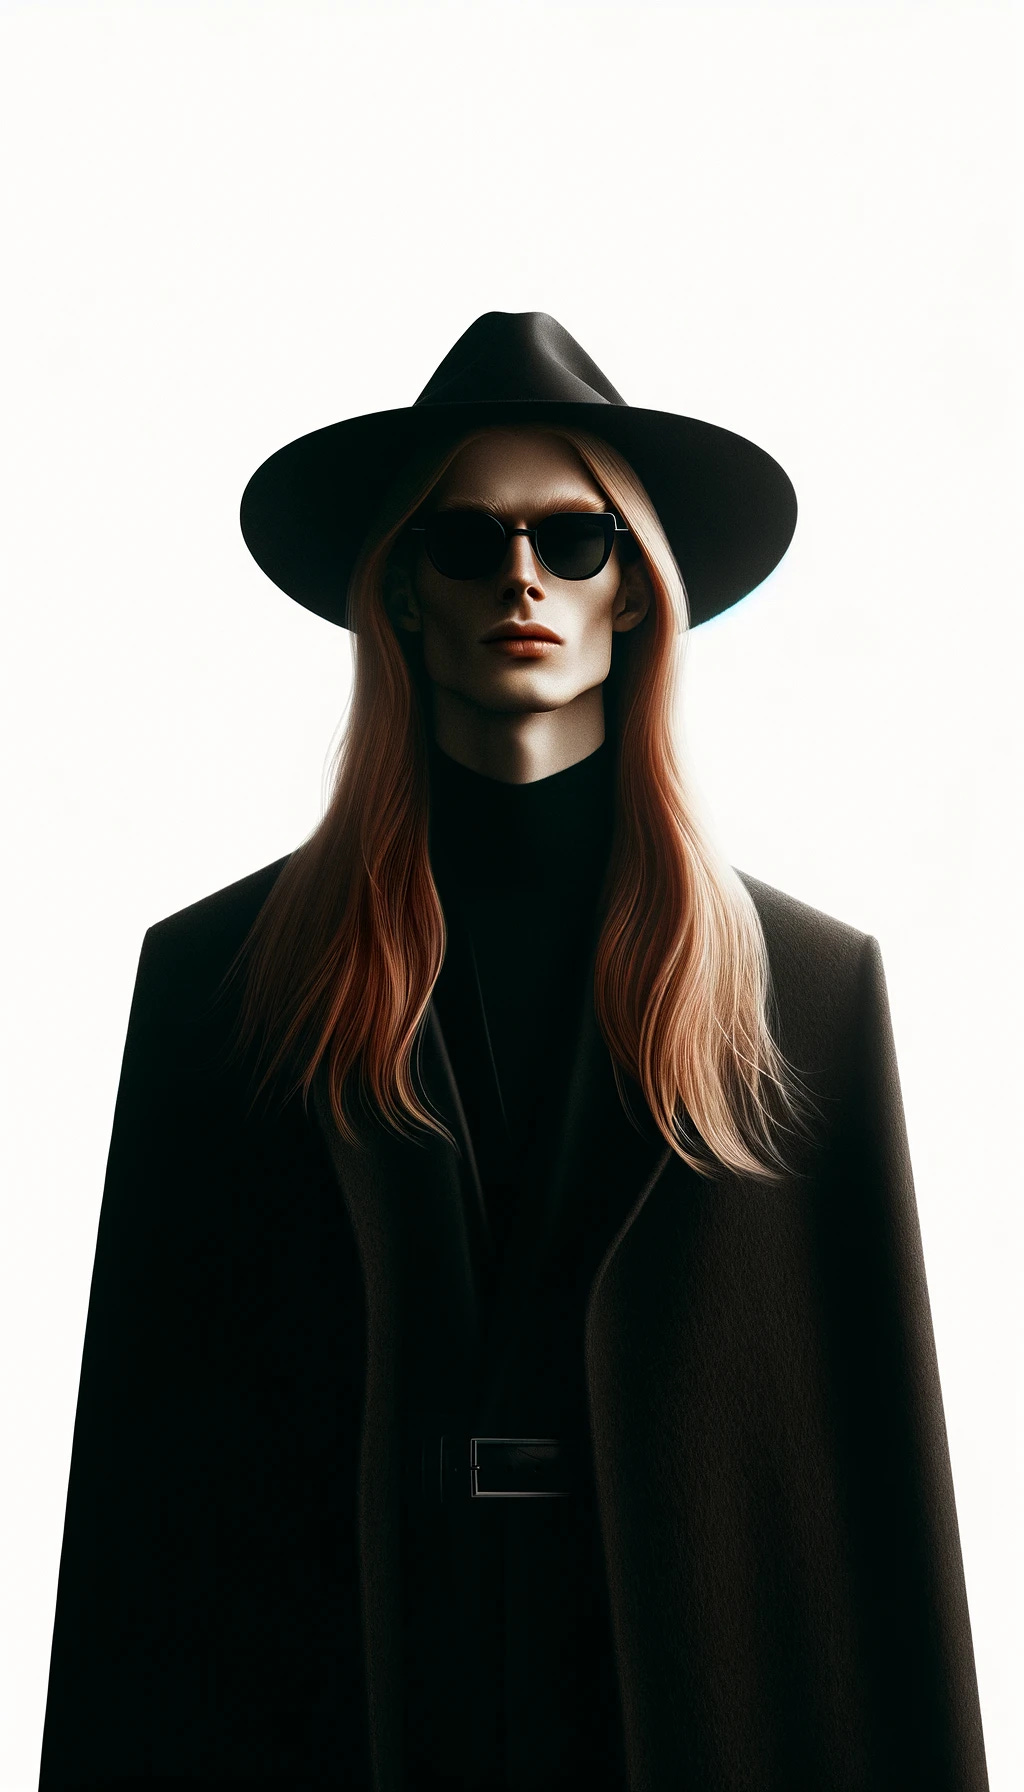 A minimalist fashion portrait with a stark white background, featuring a lithe red-blonde long-haired man with high cheekbones and an angular jawline. The style is ultra-flat with no shadows or highlights, giving it an illustrative look. He's wearing movie star sunglasses, a wide-brimmed dark hat, a cloak-like astrakhan coat, and polished black calfskin leather Italian boots. The image emphasizes simplicity and flatness, capturing the essence of a bold, dramatic fashion statement.